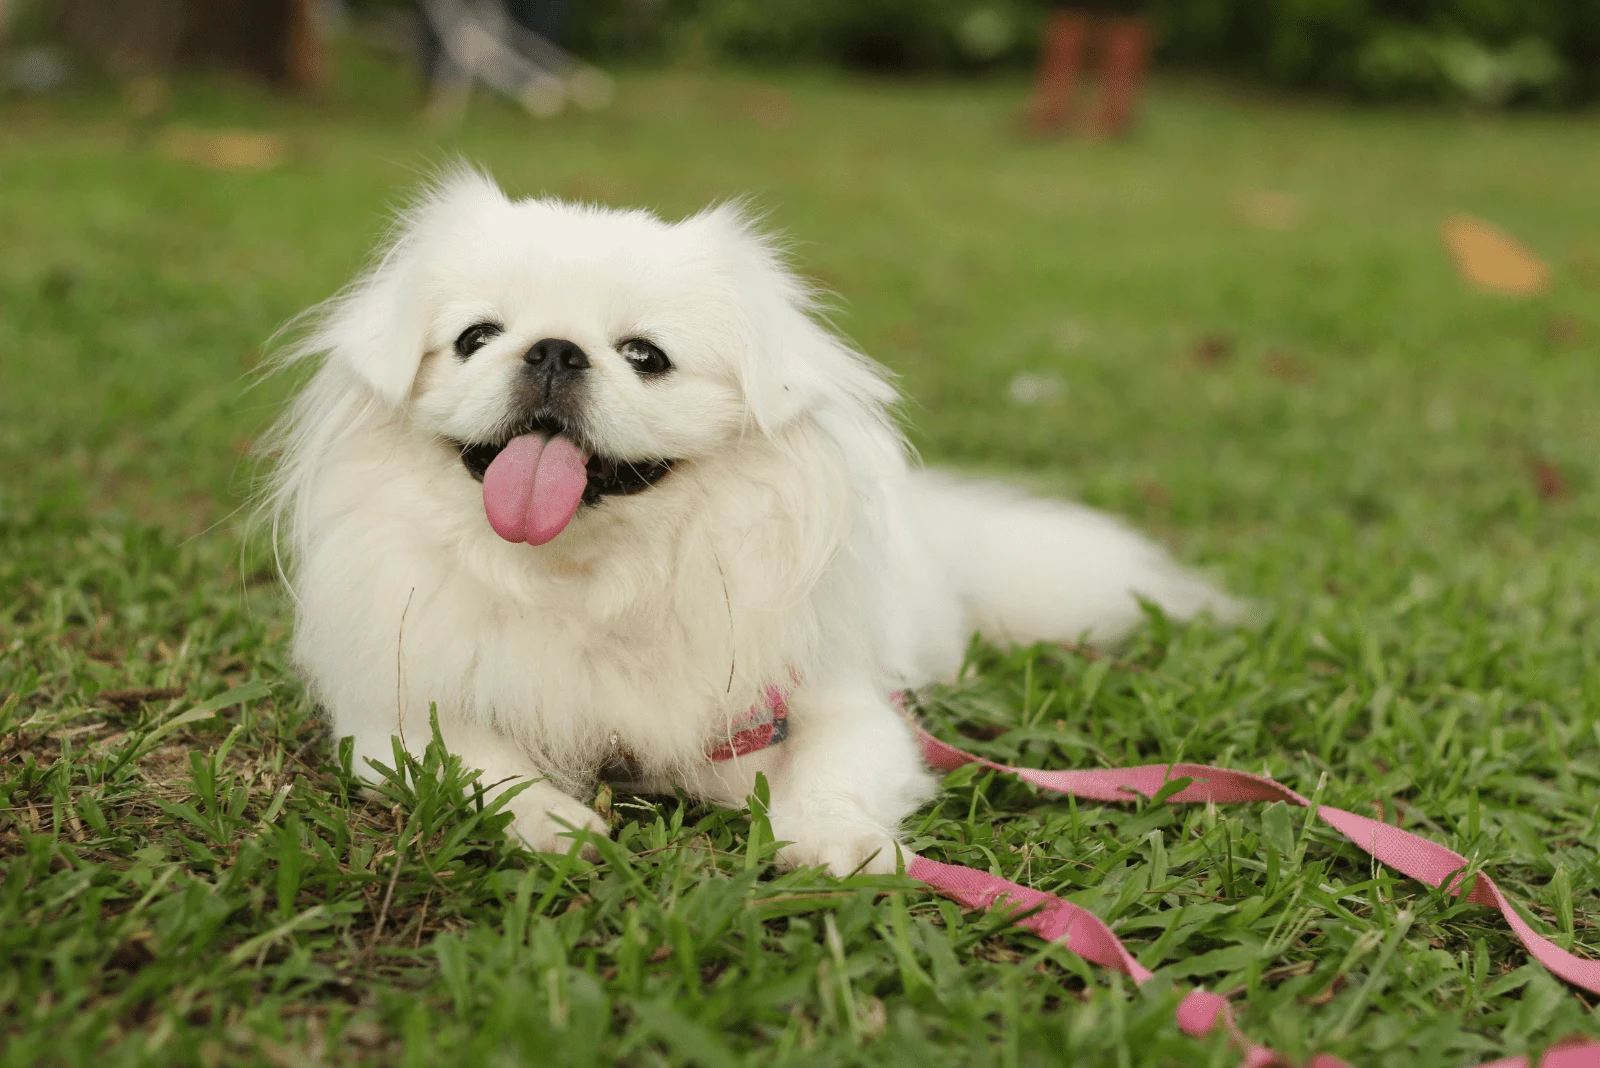 a Pekingese puppy lies on the grass with its tongue out